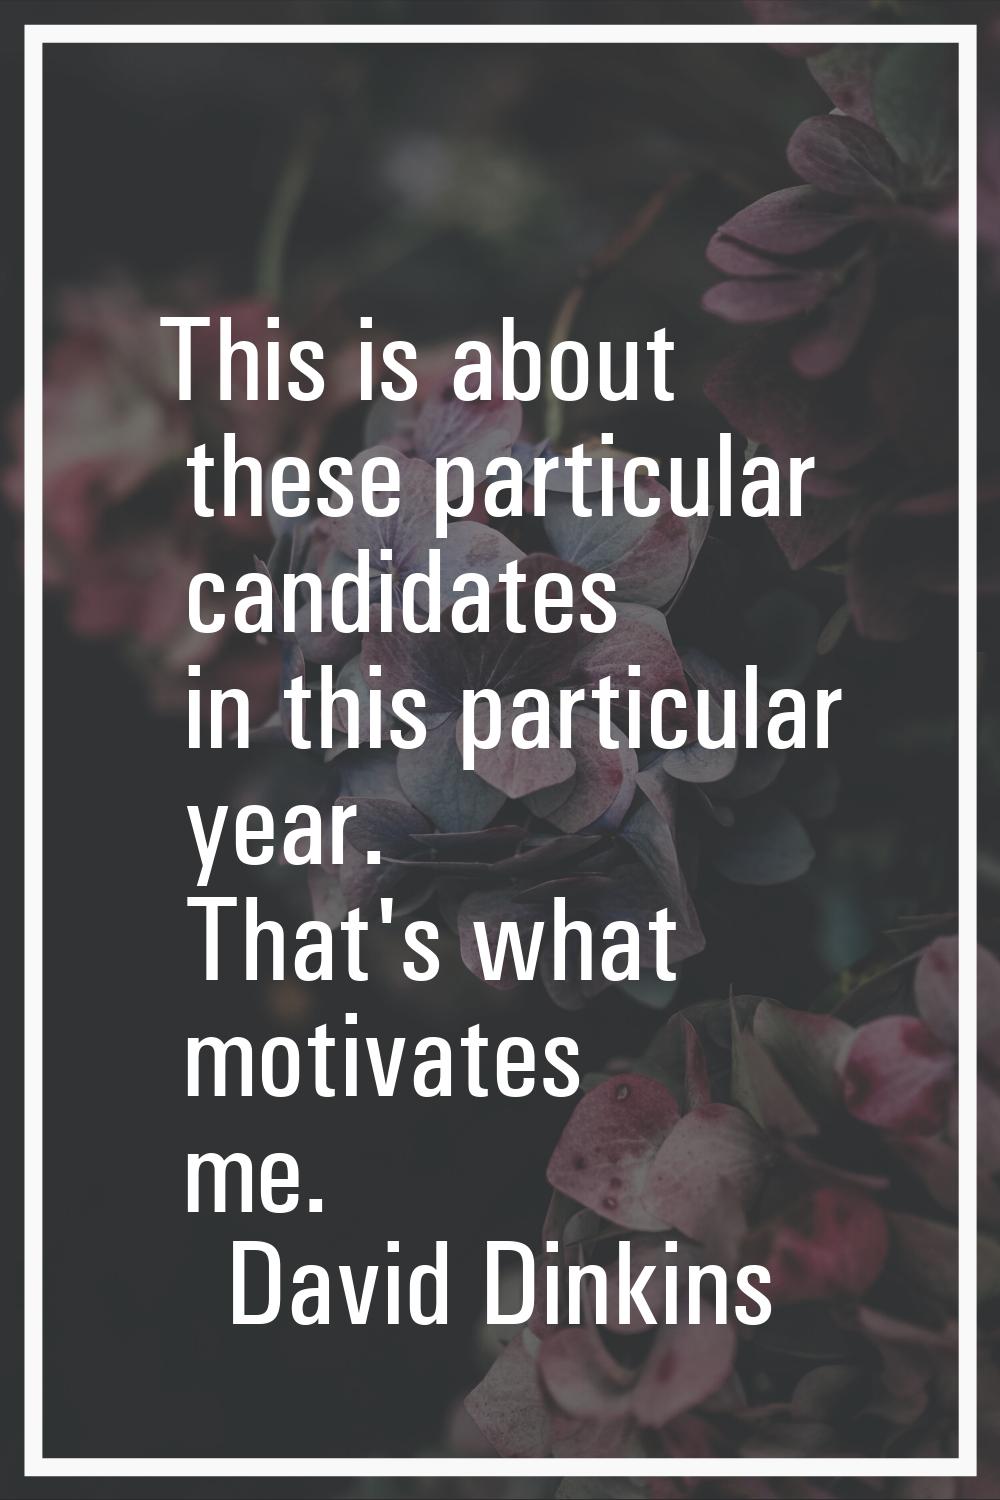 This is about these particular candidates in this particular year. That's what motivates me.